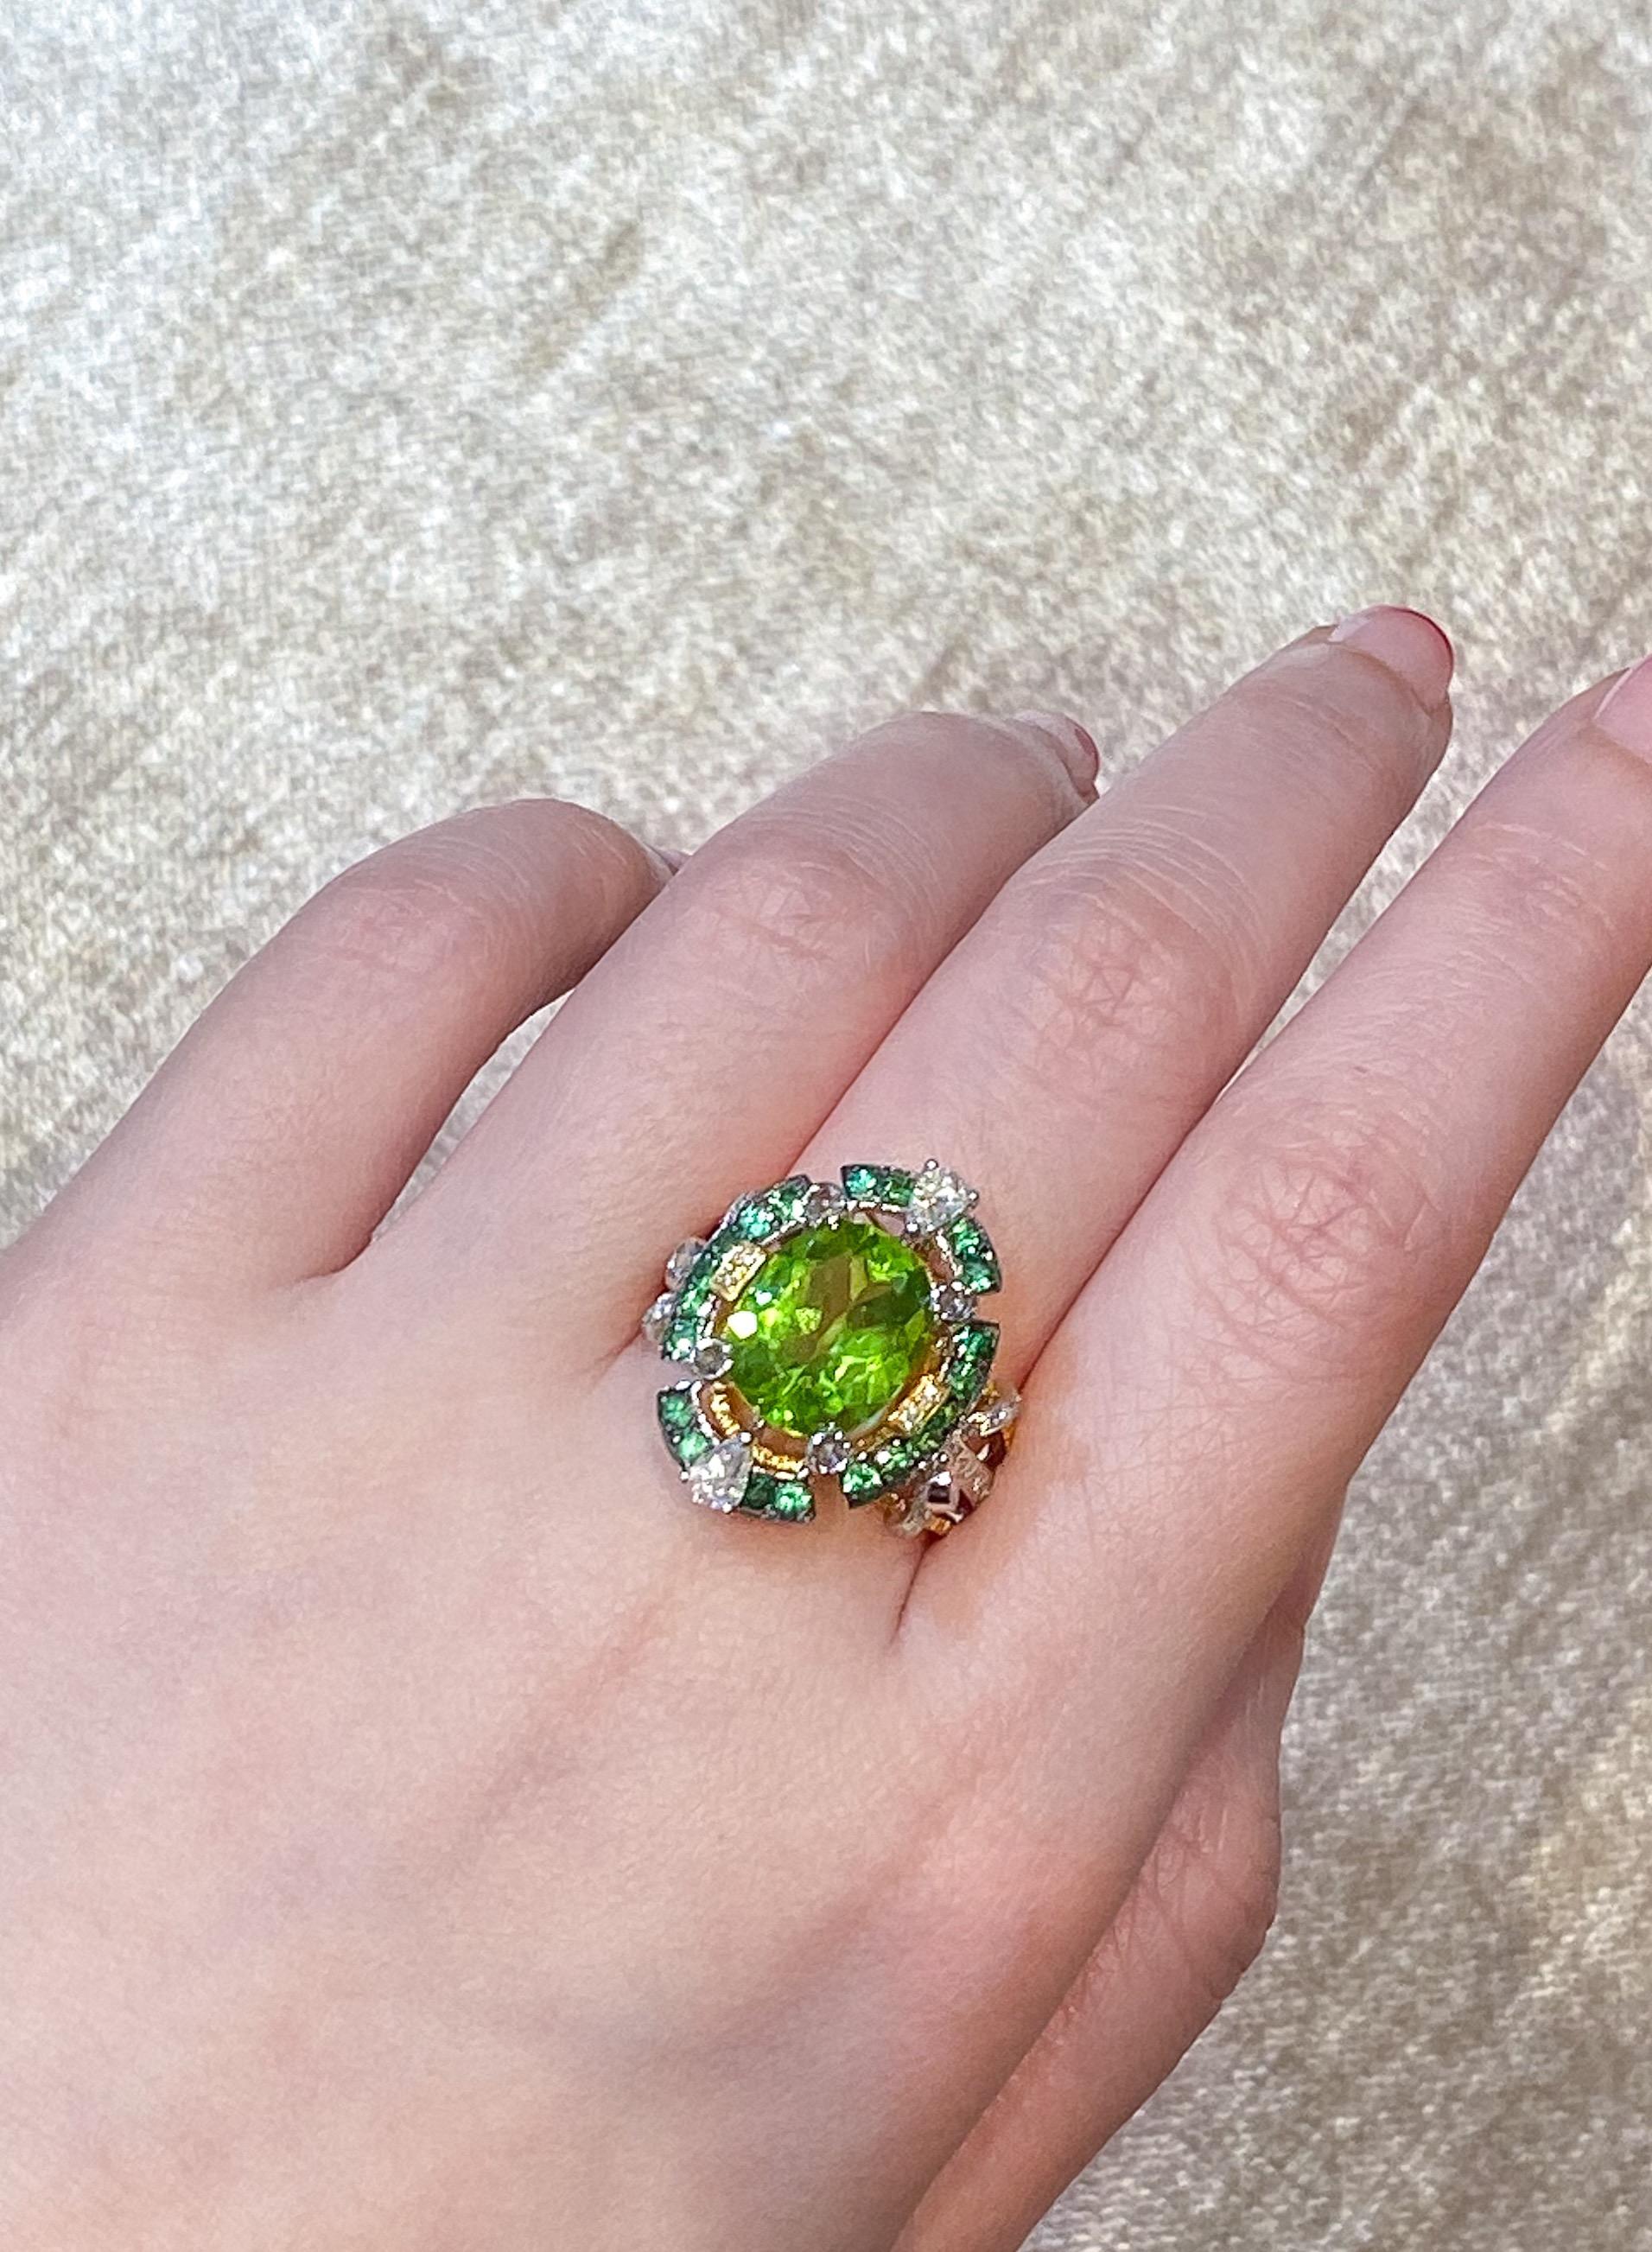 Peridot, the August birthstone and the stone of strength is an unlikely yet splendid choice of gemstone for an engagement. Designed by Dilys’ founder and creative director, Dilys Young, the ring takes on a classic yet quaint design that is exquisite